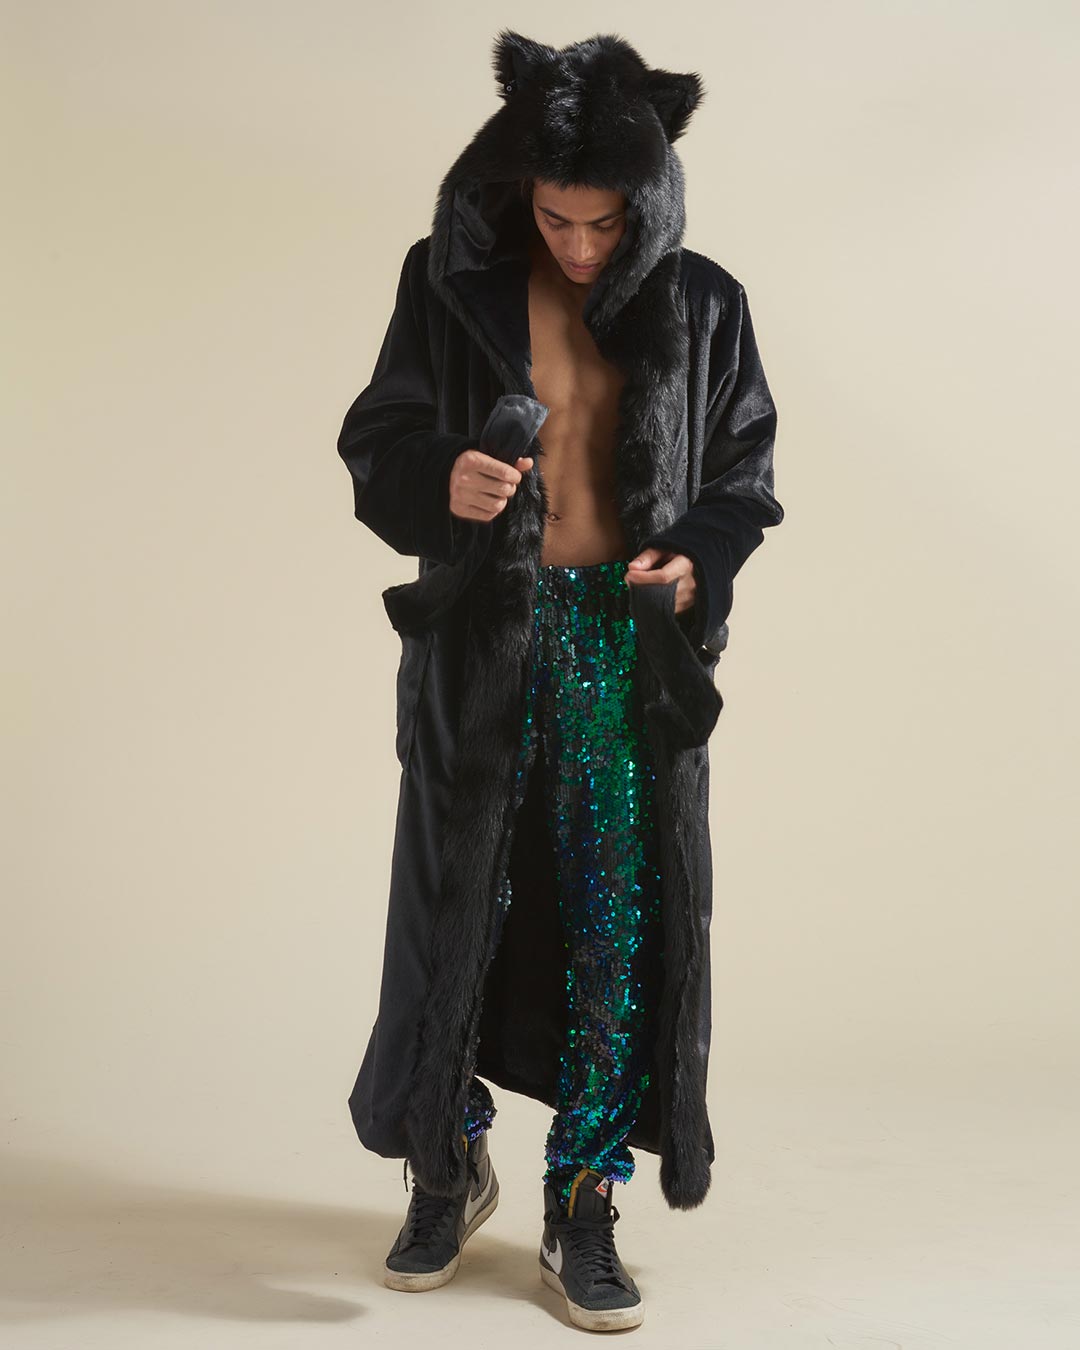 Man Wearing Hooded Black Panther Classic Faux Fur Style Robe